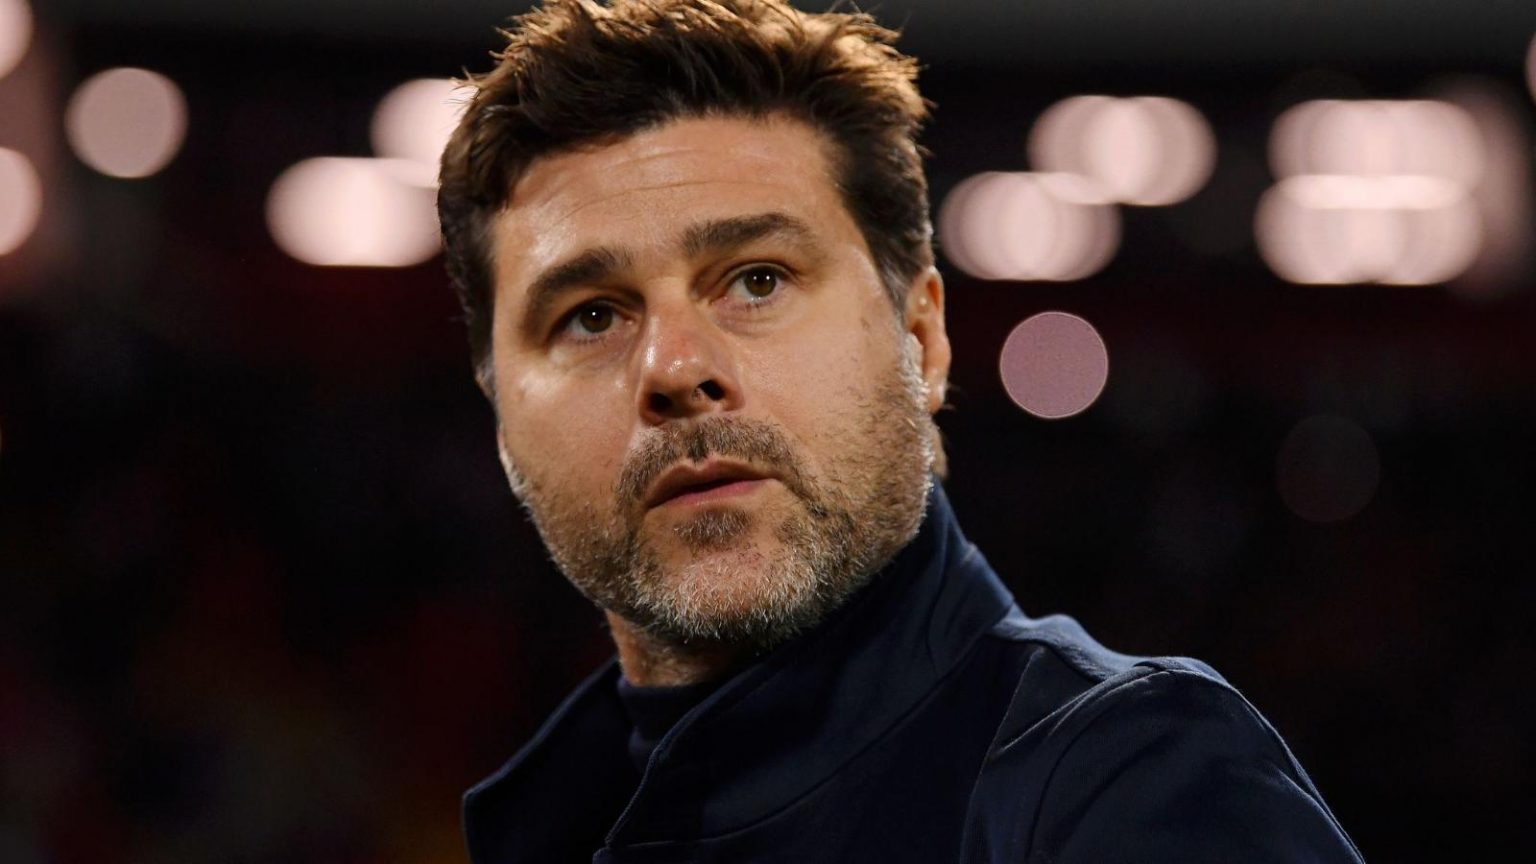 EPL: Manchester United take decision on Pochettino after talks with ex-Chelsea coach